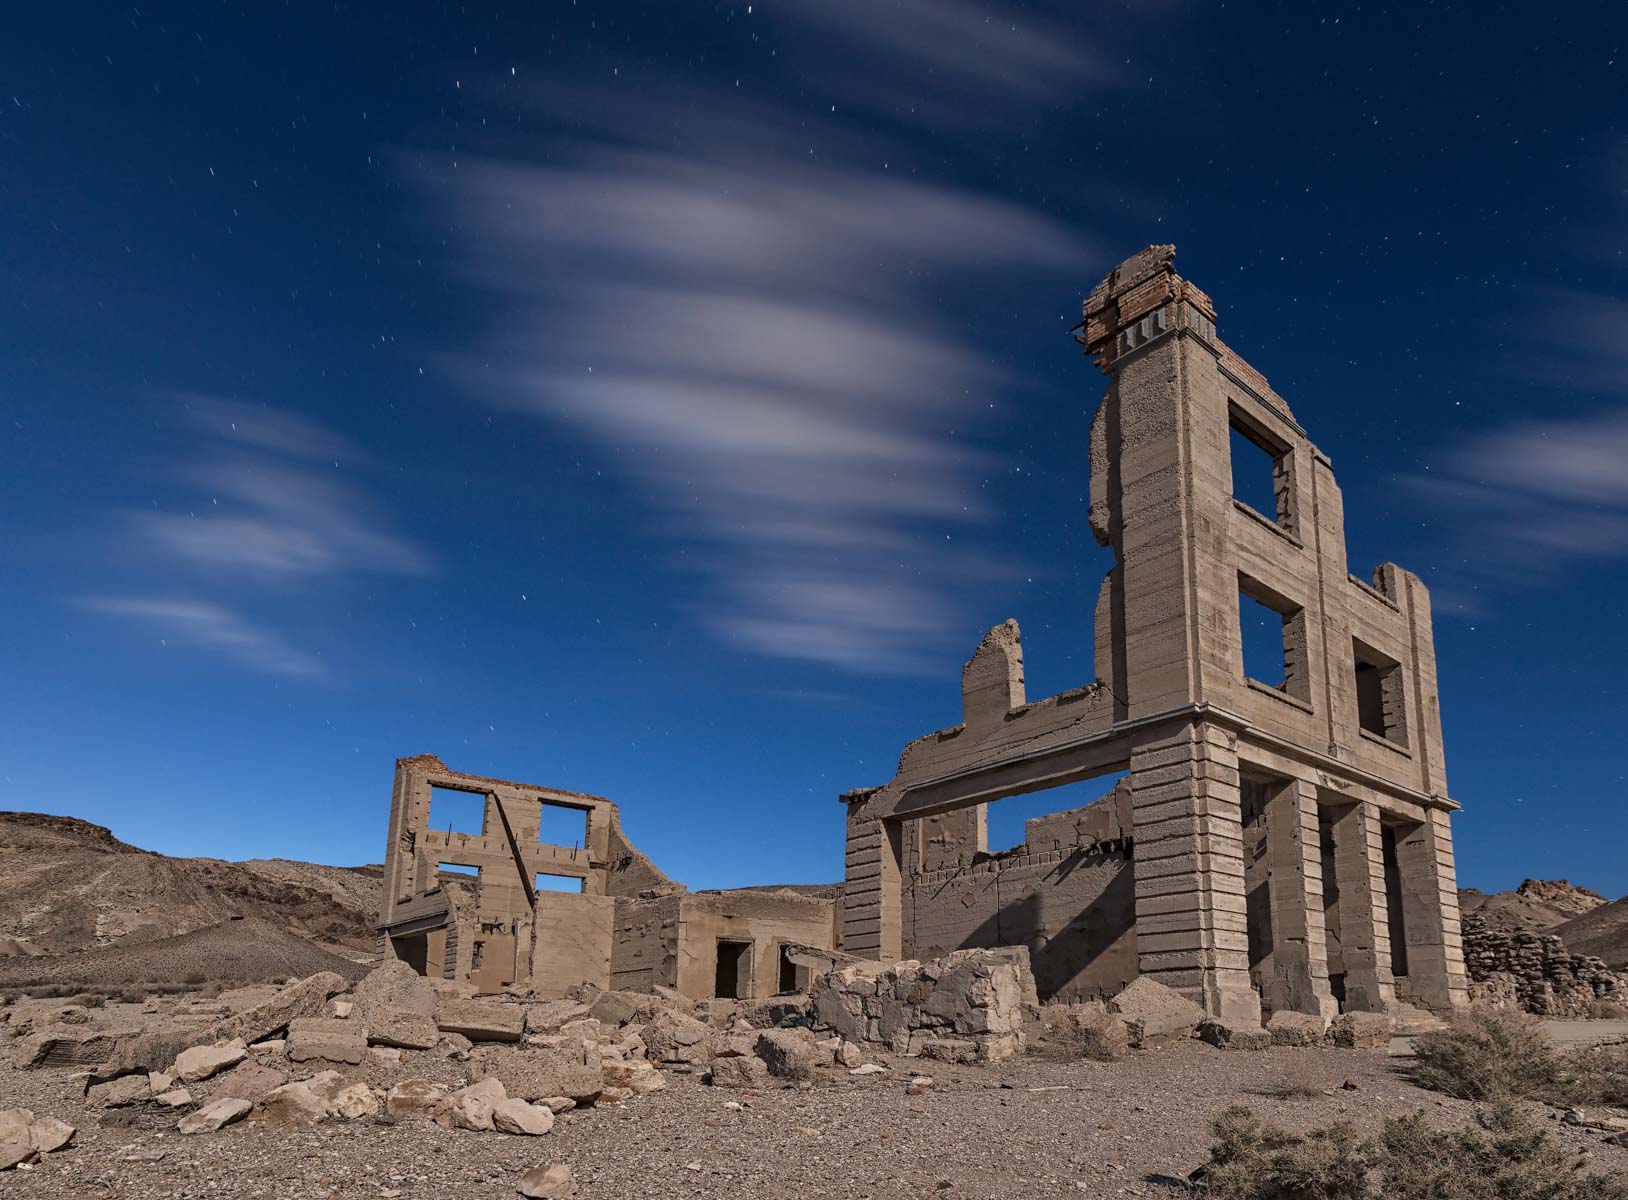 The Cook Bank in Rhyolite ghost town, Nevada